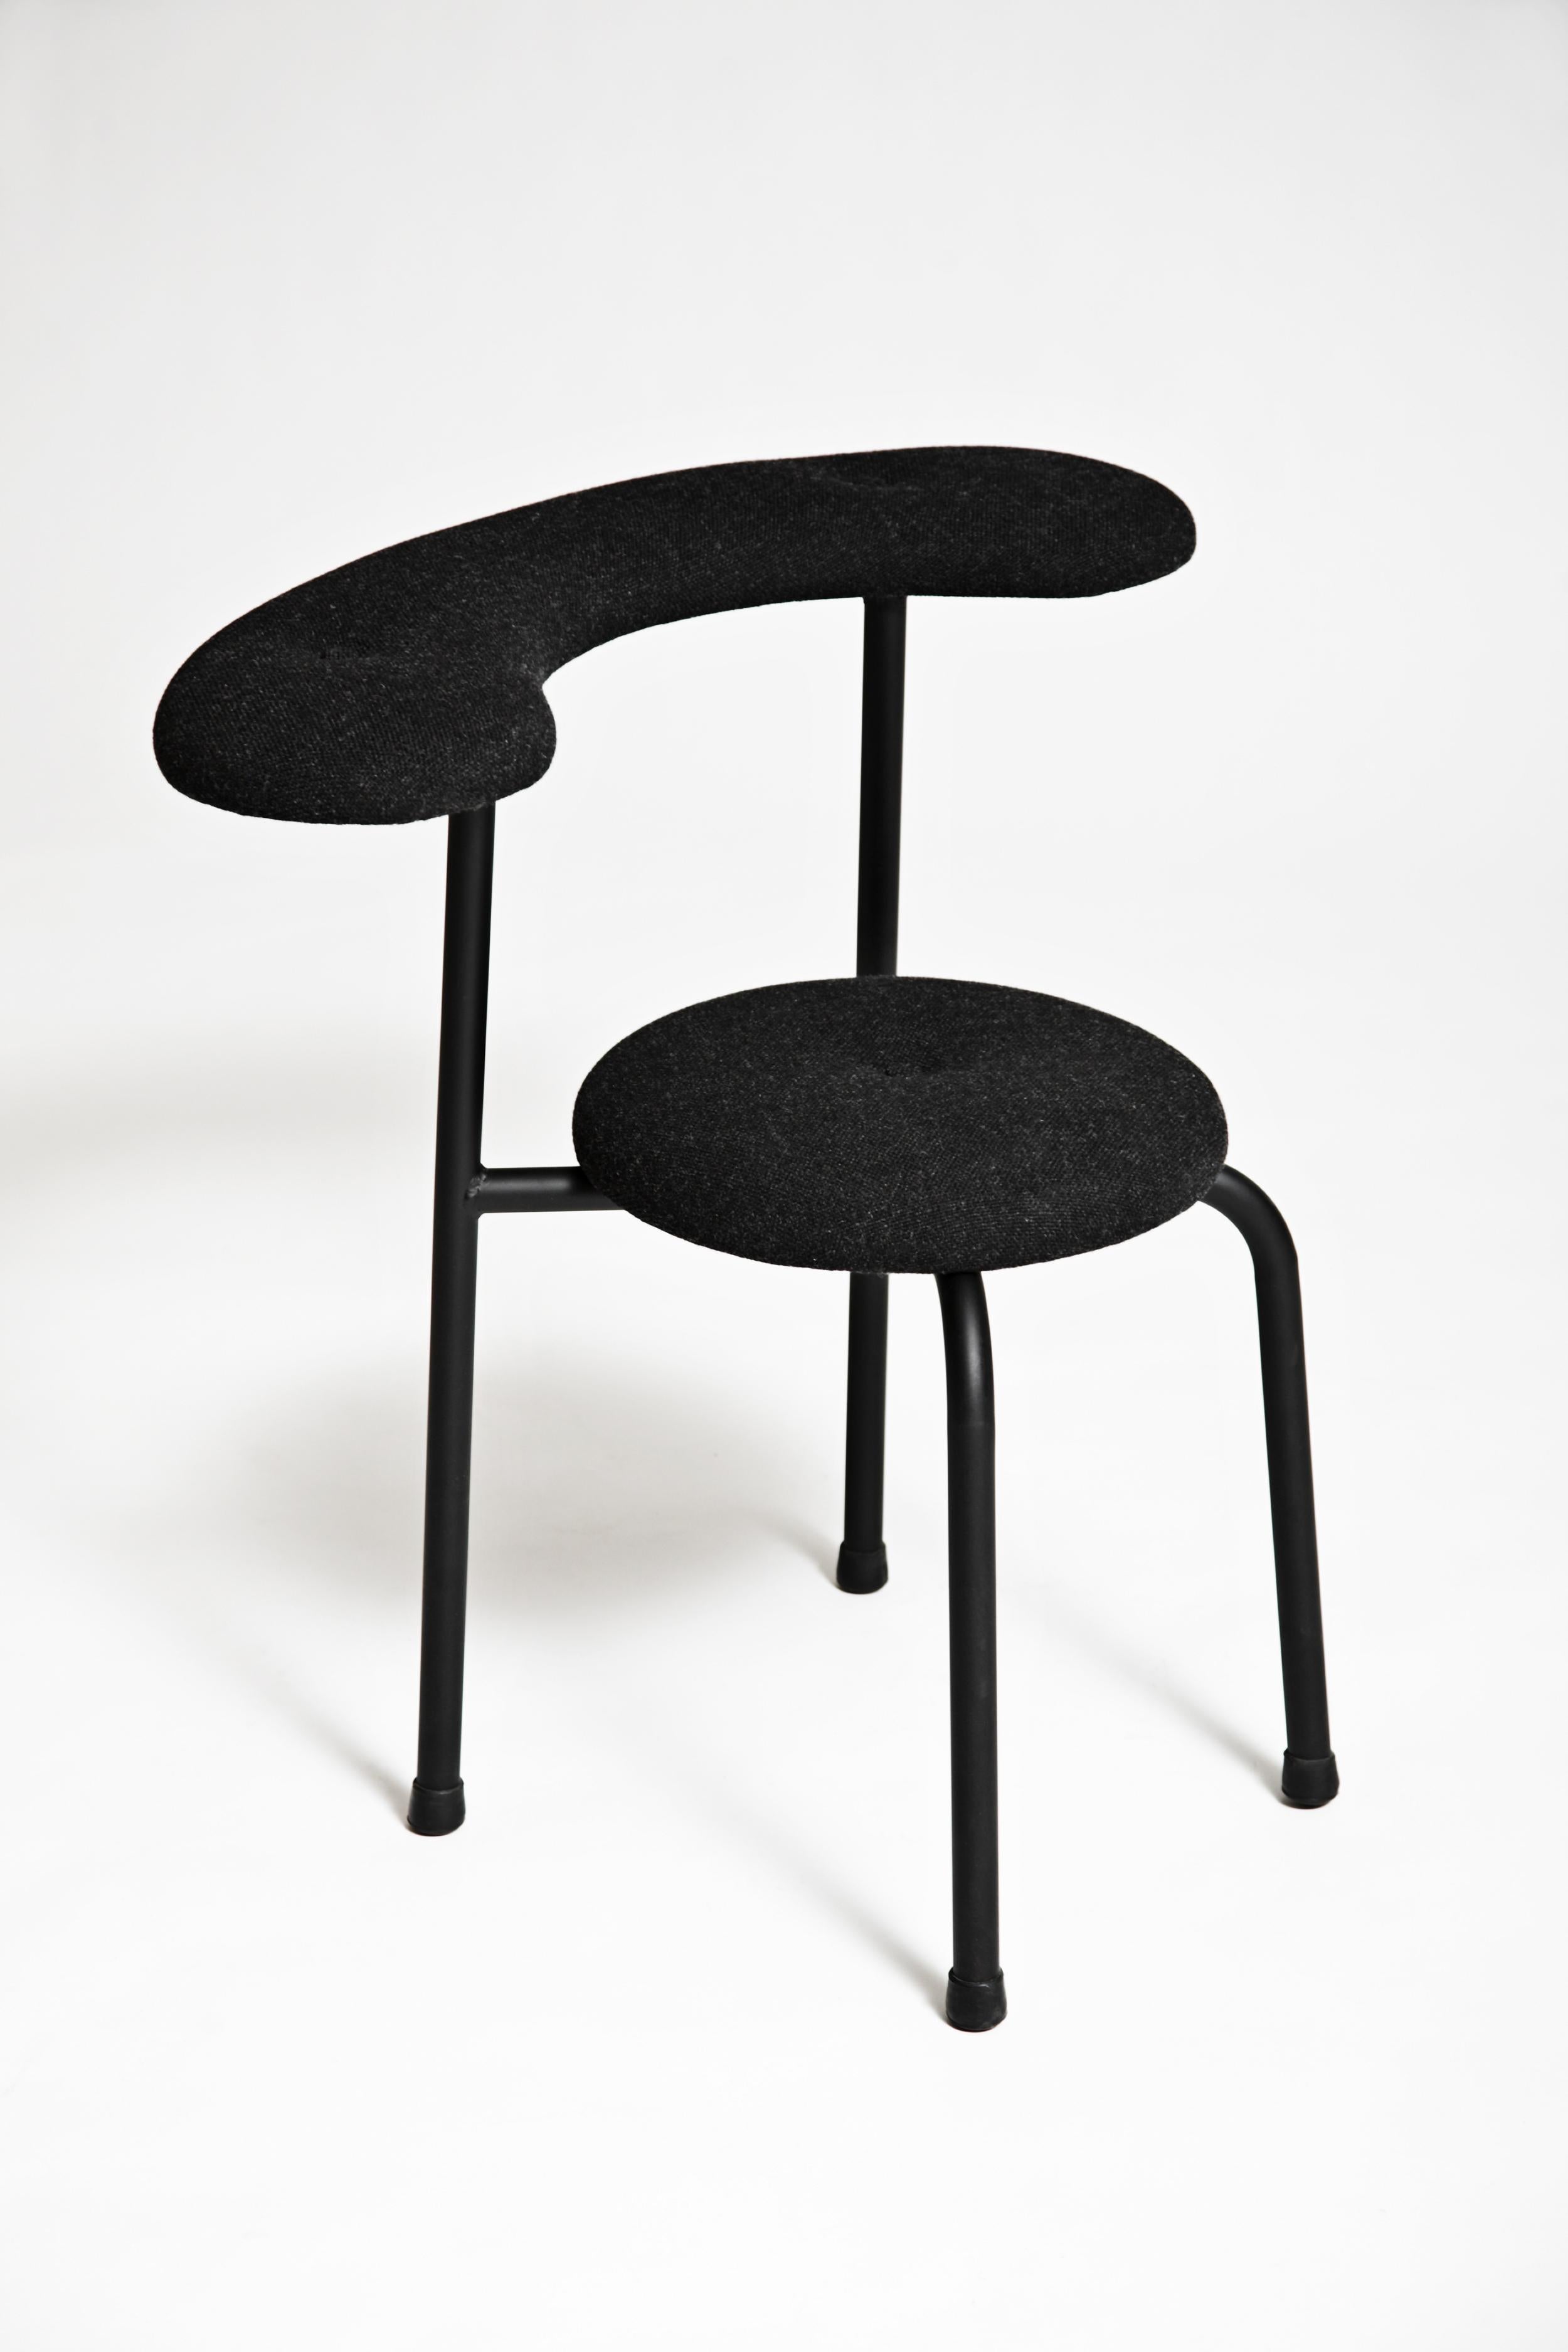 Unique upholstered bug stool by Kim Thome
Dimensions: W 55 x D 55 x  H 70 cm
Materials: Steel frame, powder coated, ebonised ash

Kim Thomé is a Norwegian designer based in London.